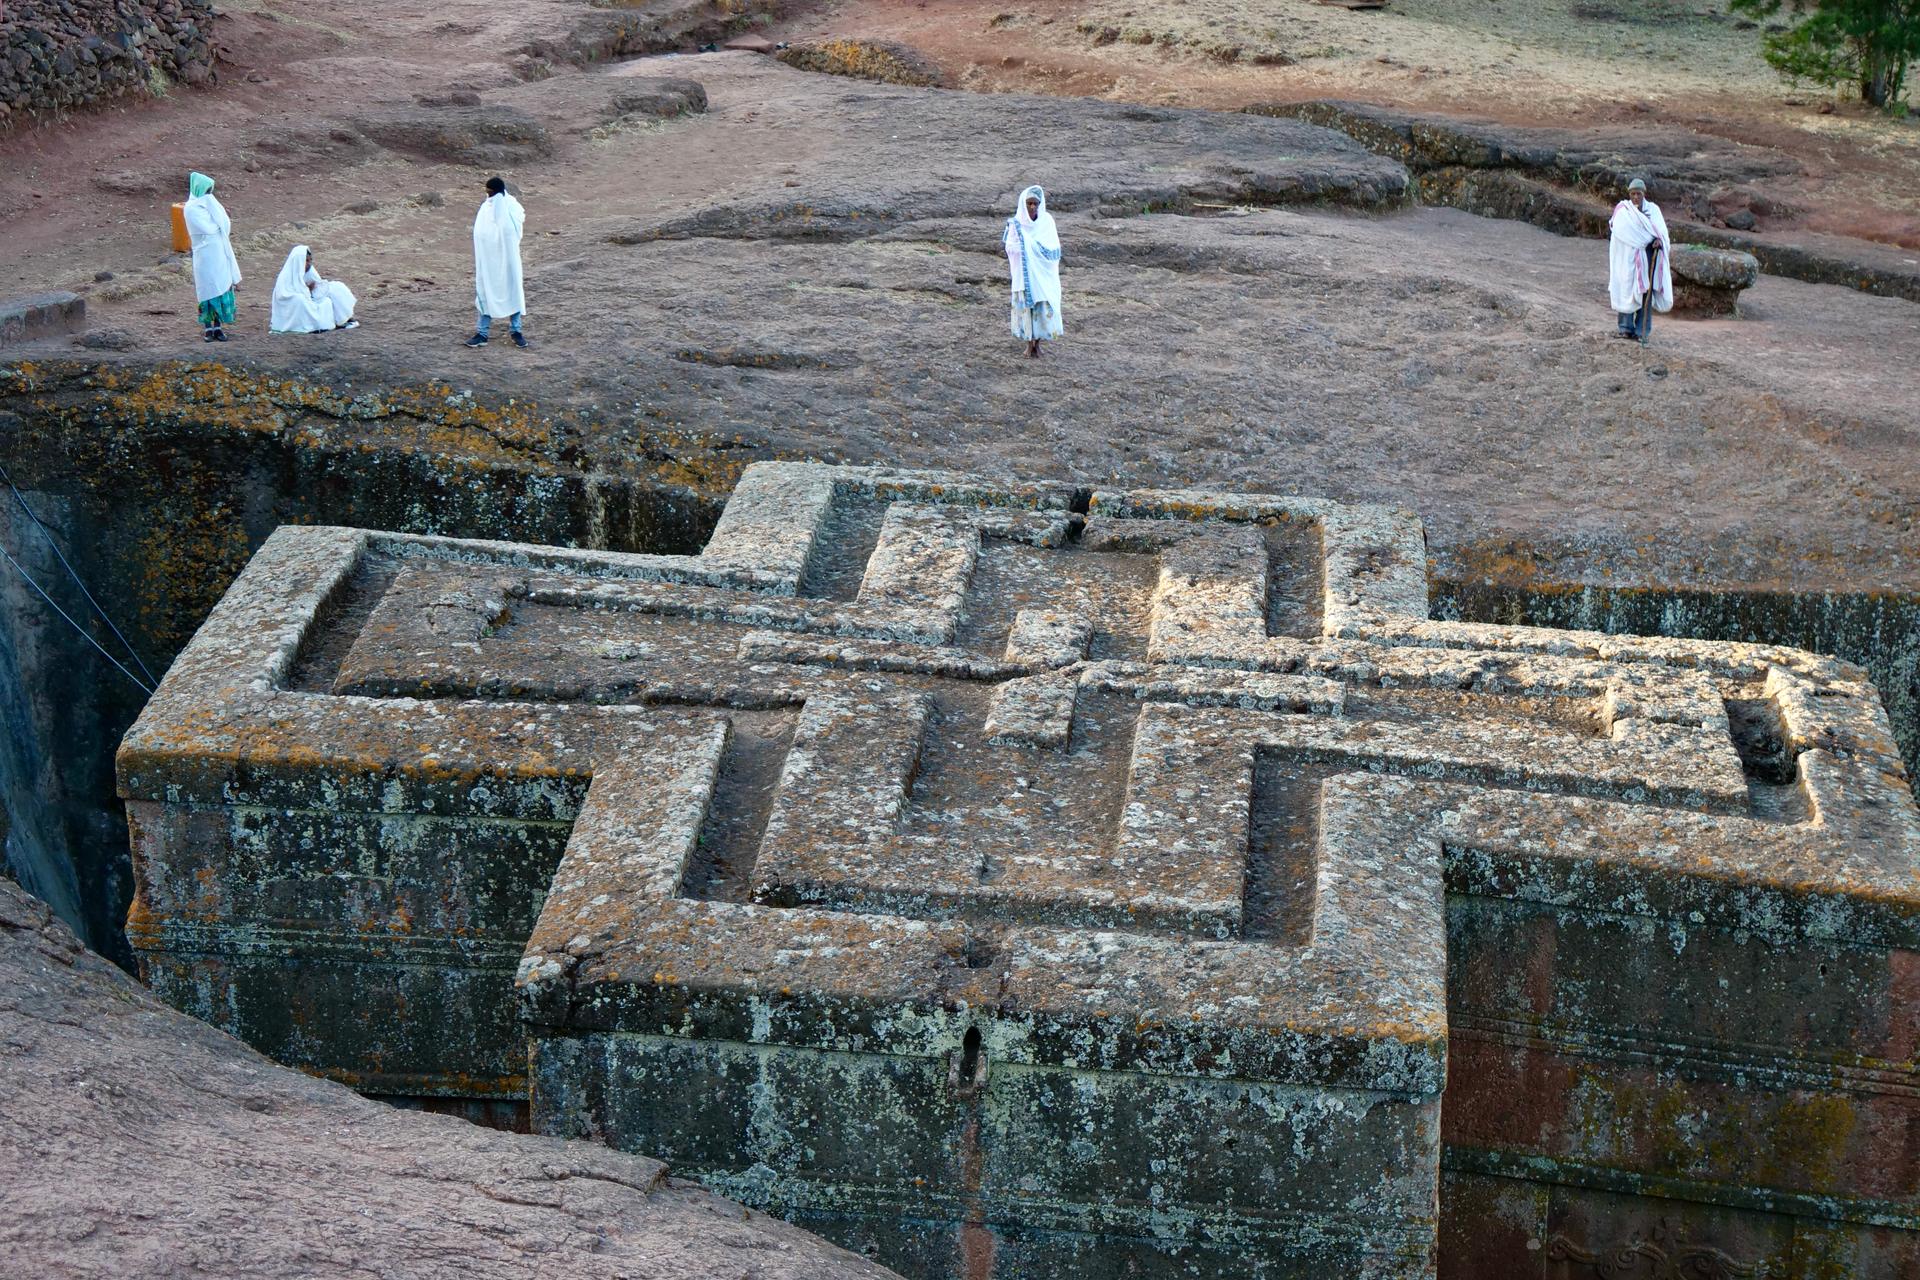 Worshippers praying at the 13th-century churches of Lalibela, Ethiopia, Feb. 16, 2022 .